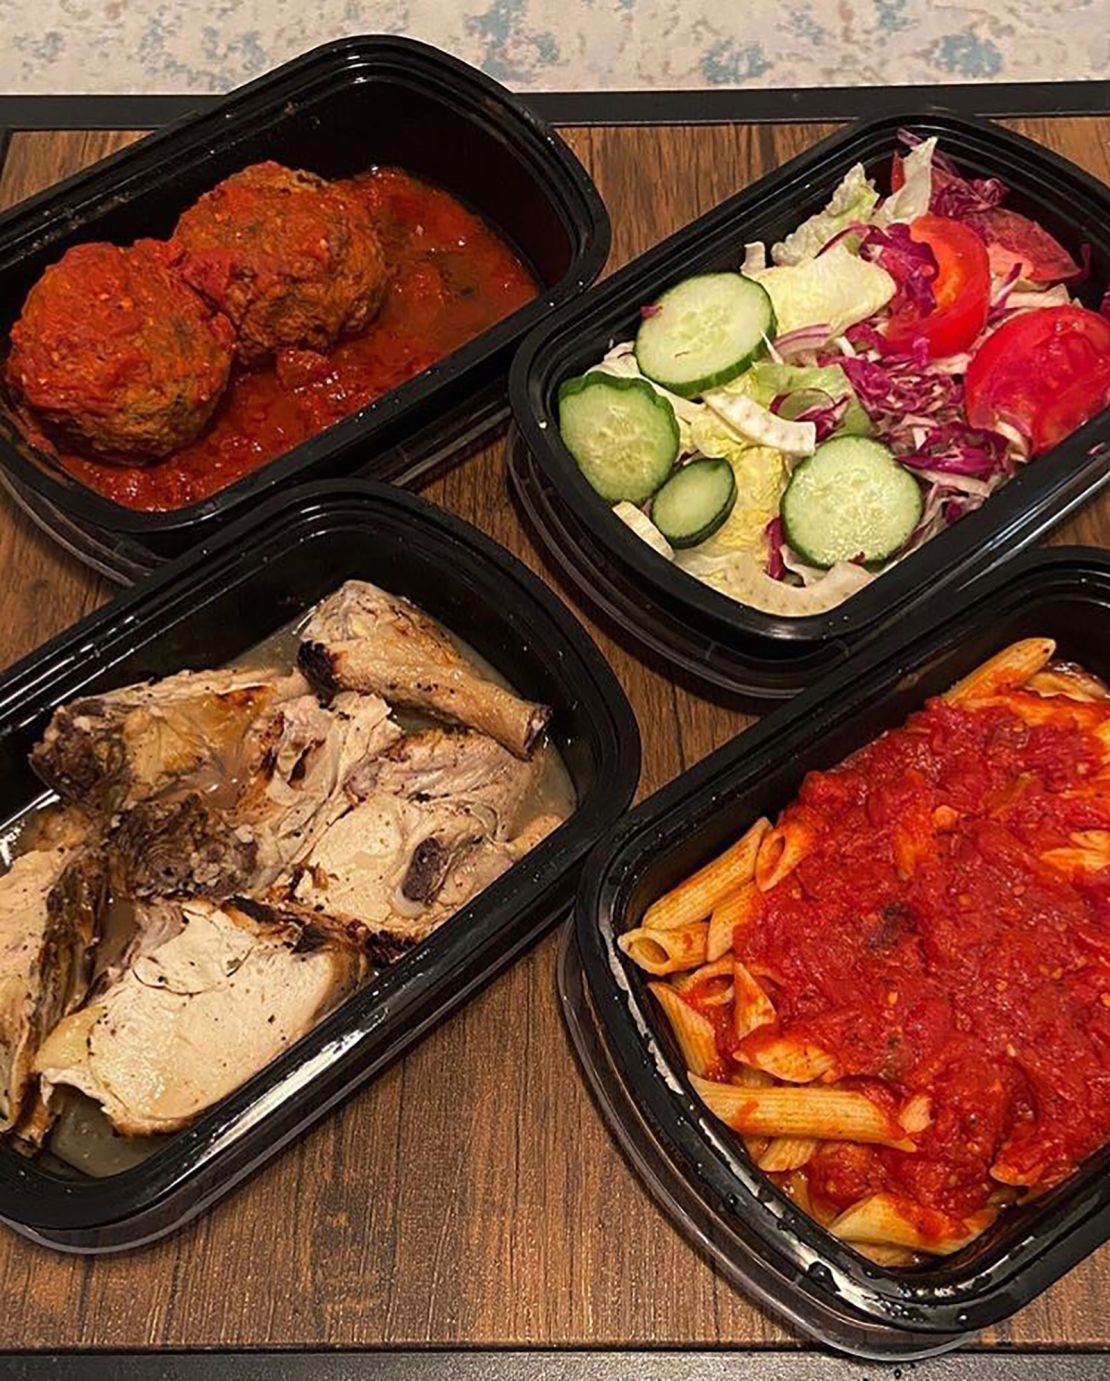 The Rao's takeout meal for two includes penne, lemon chicken, a salad, and, of course, the restaurant's famous meatballs.